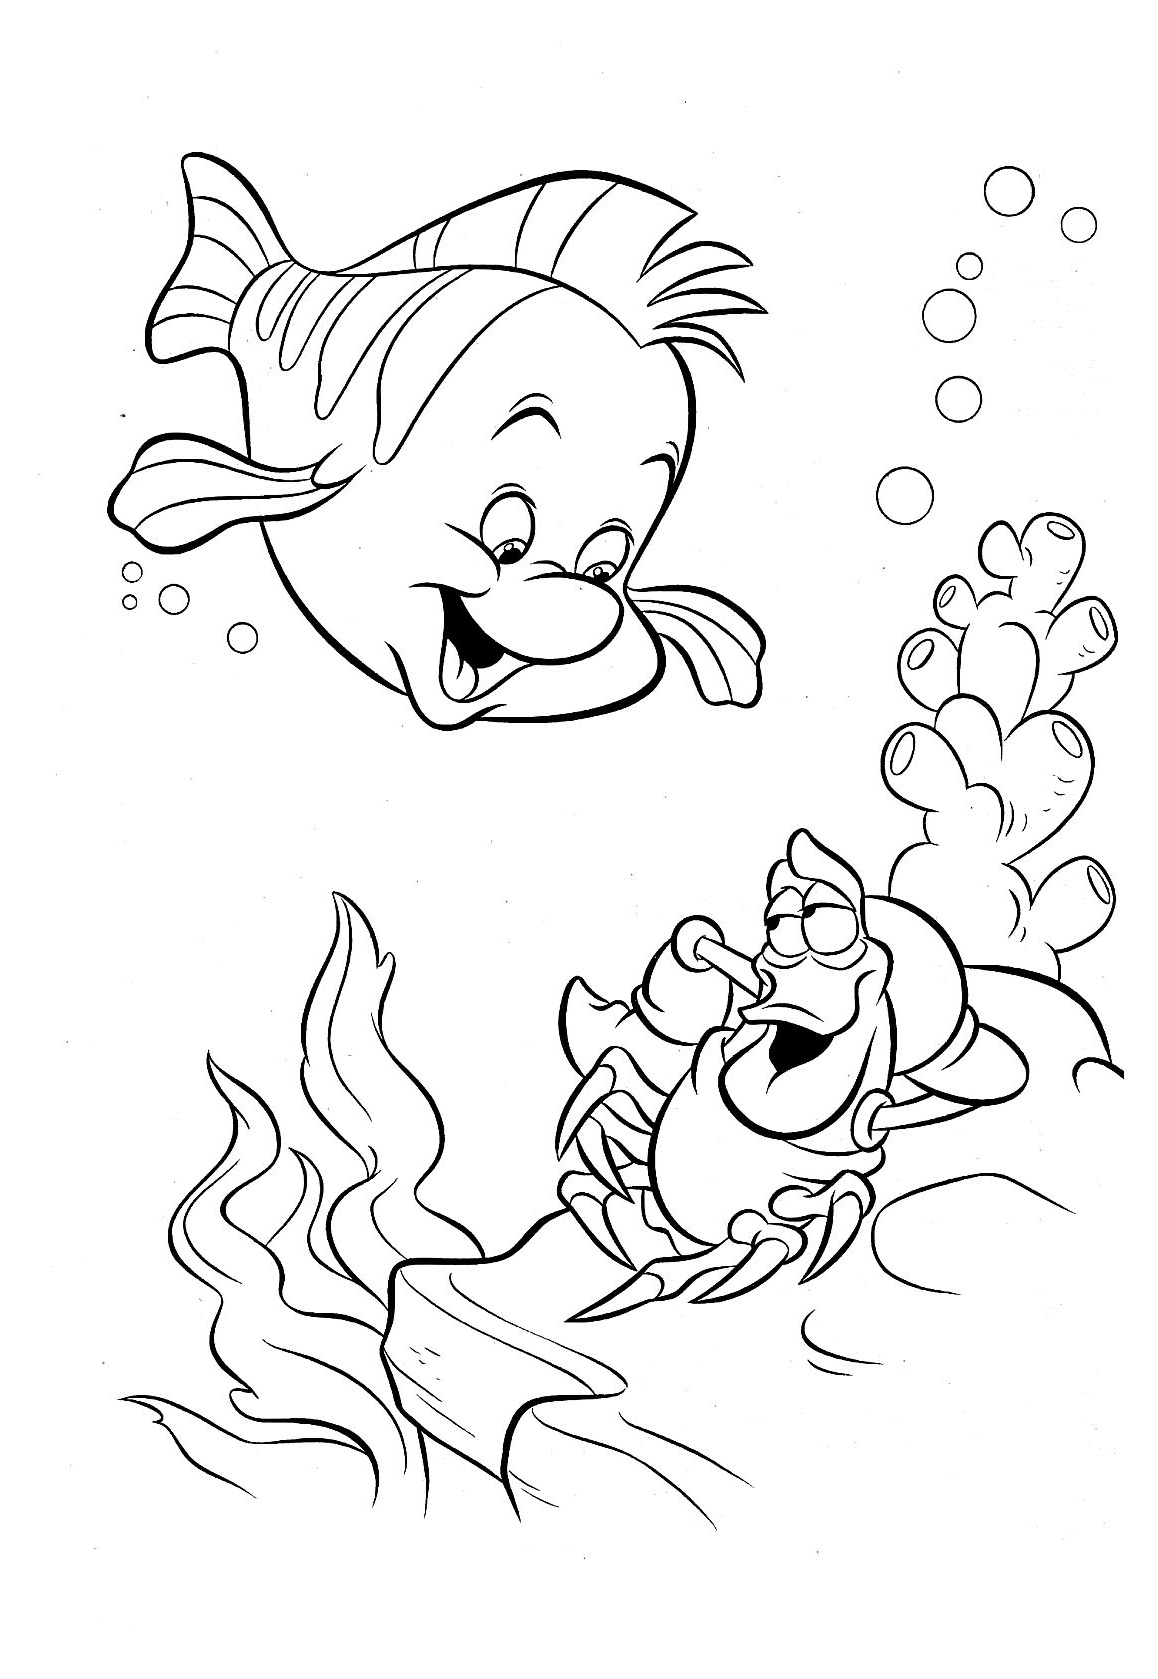 image=the little mermaid Coloring for kids the little mermaid 1